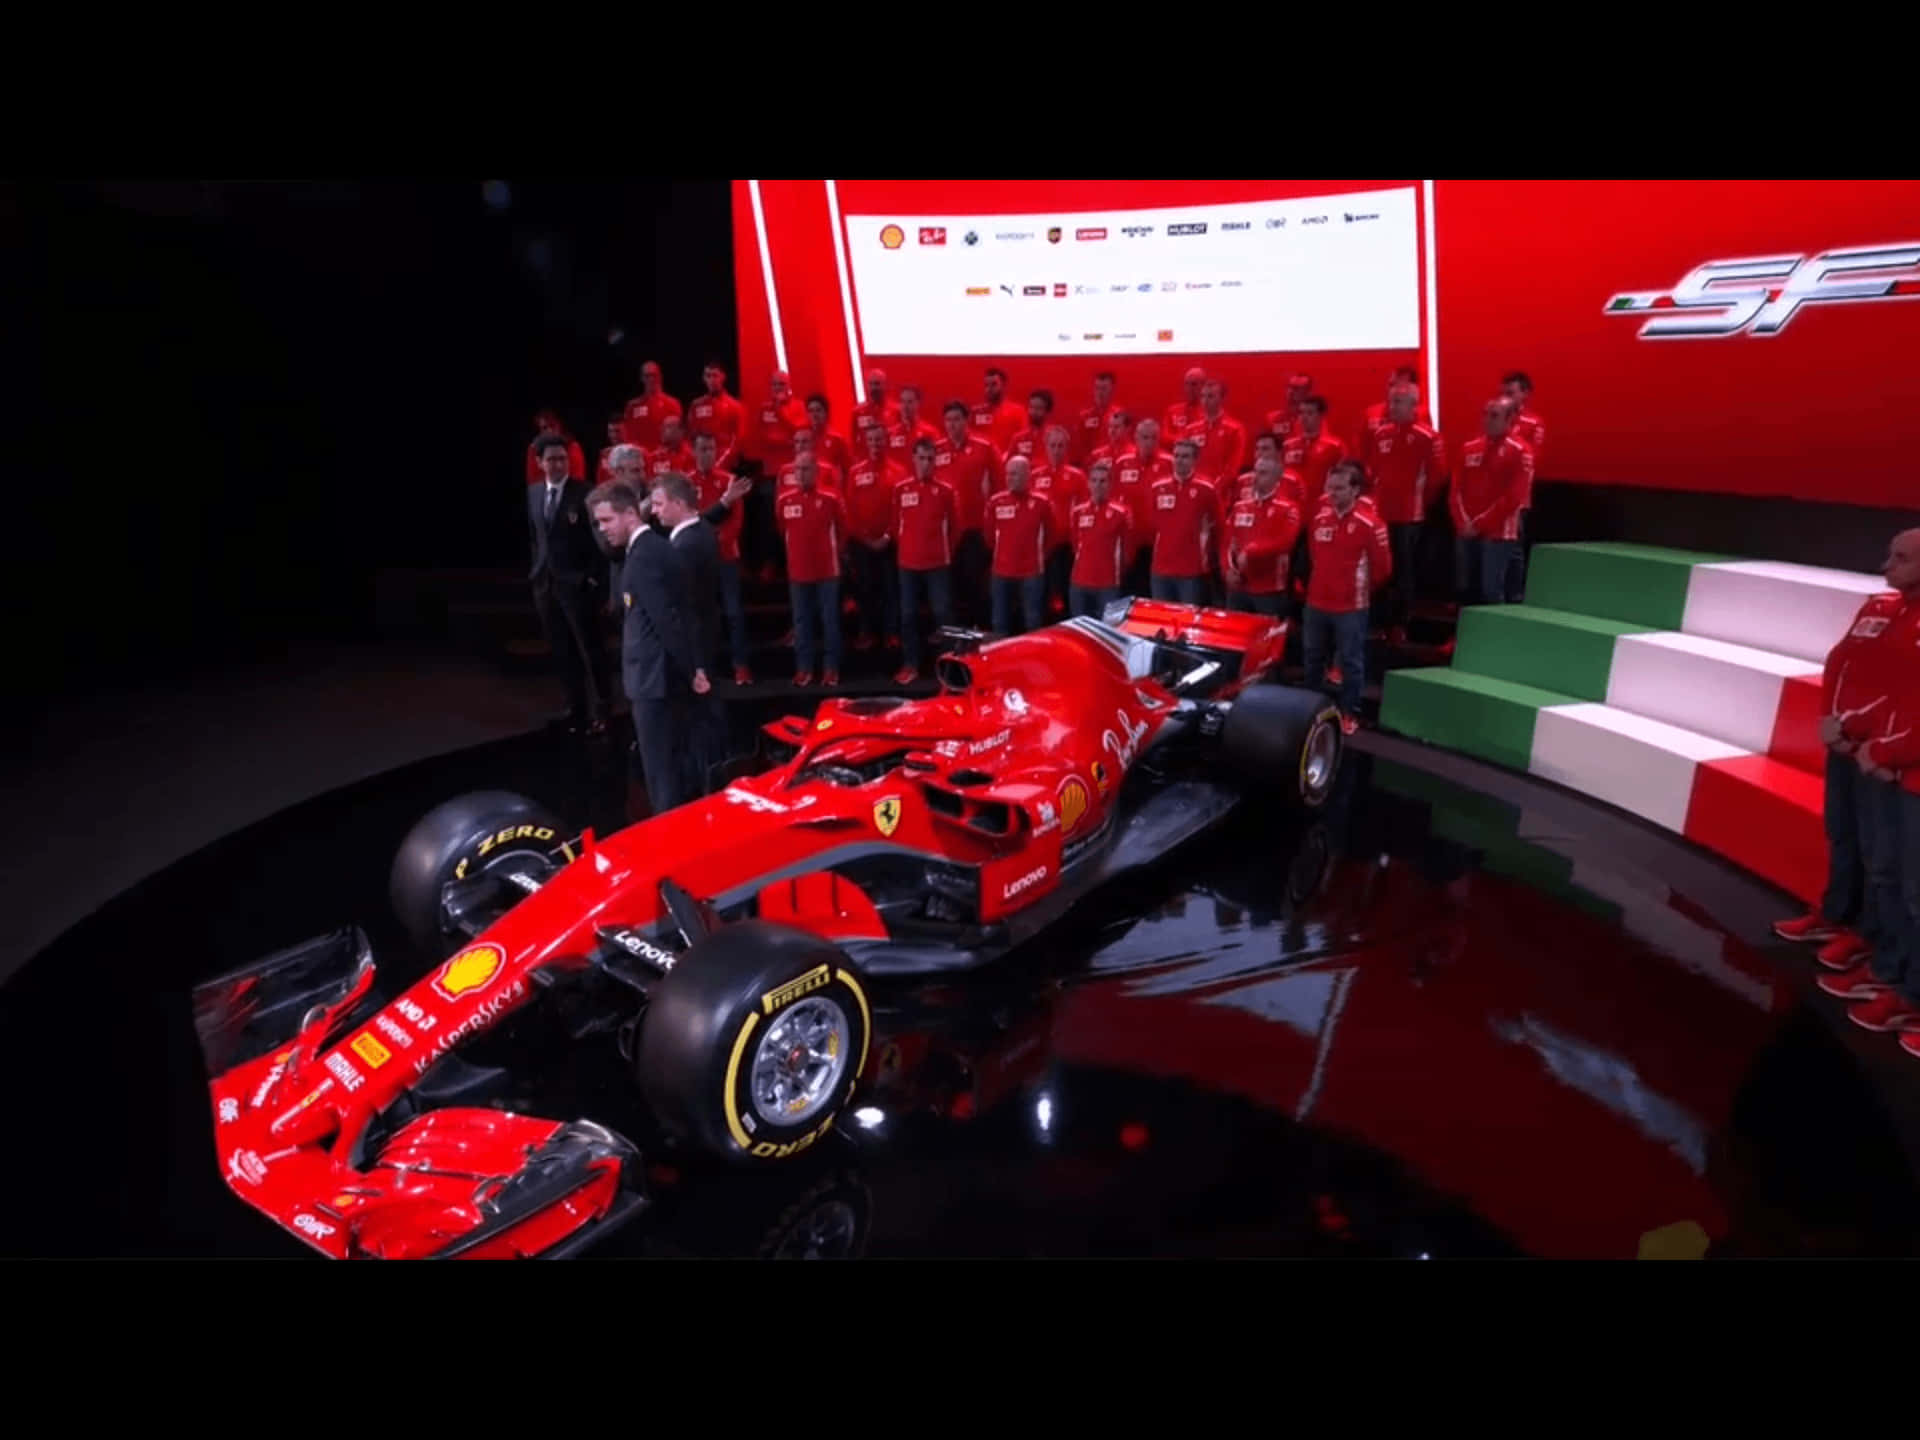 Ferrarif1-teamet - F1 2019. (note: This Sentence Is Already In Proper Swedish, As The Words Are The Same In Both Languages.)